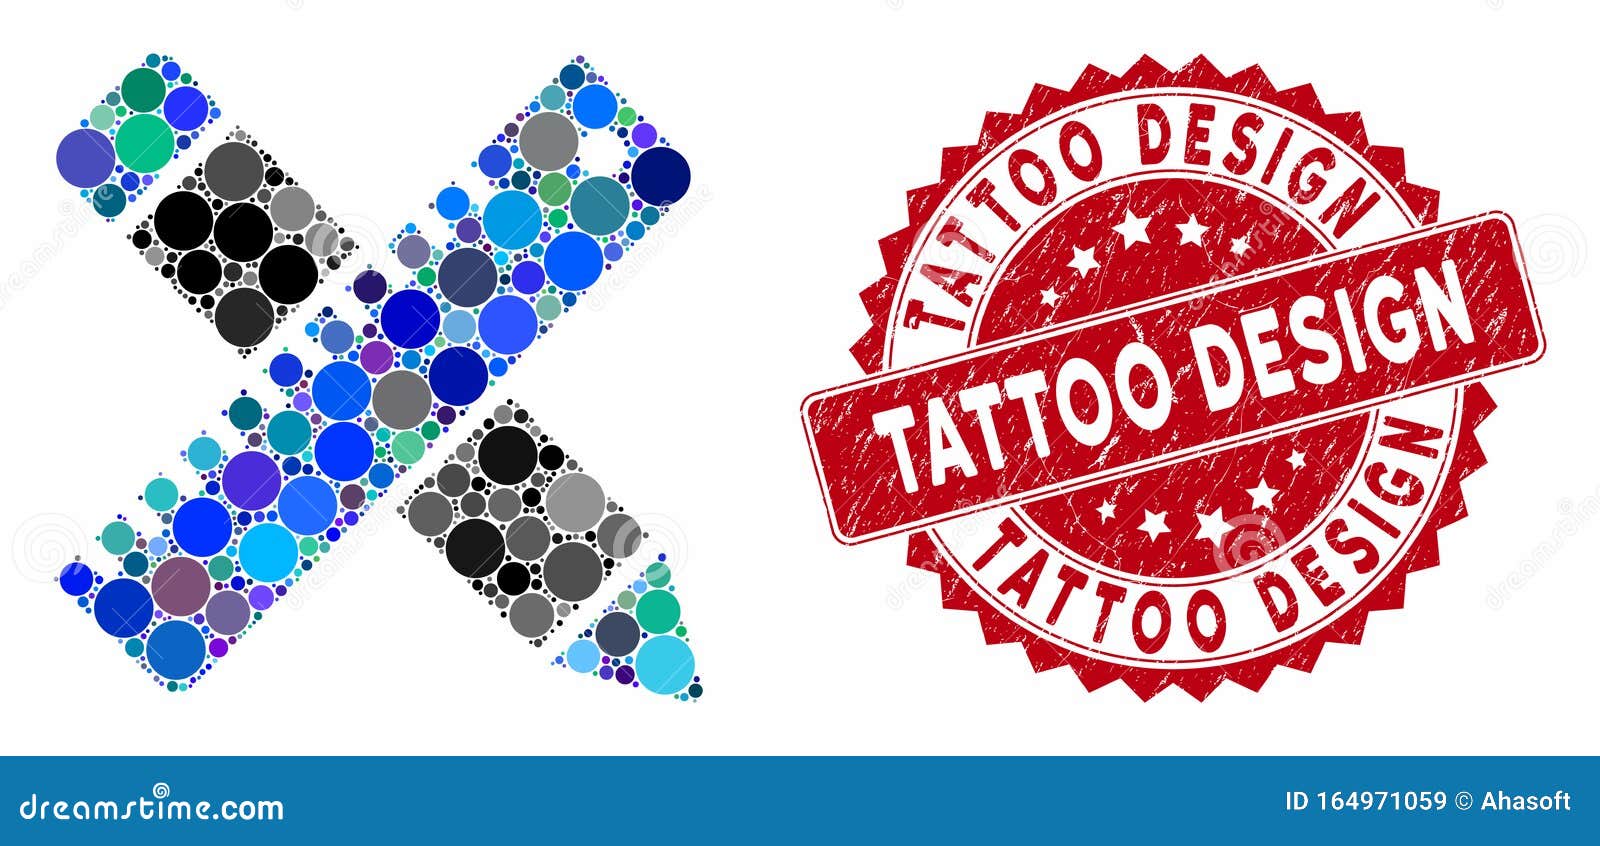 Mosaic Design Tools with Textured Tattoo Design Seal Stock Illustration -  Illustration of grunge, composed: 164971059